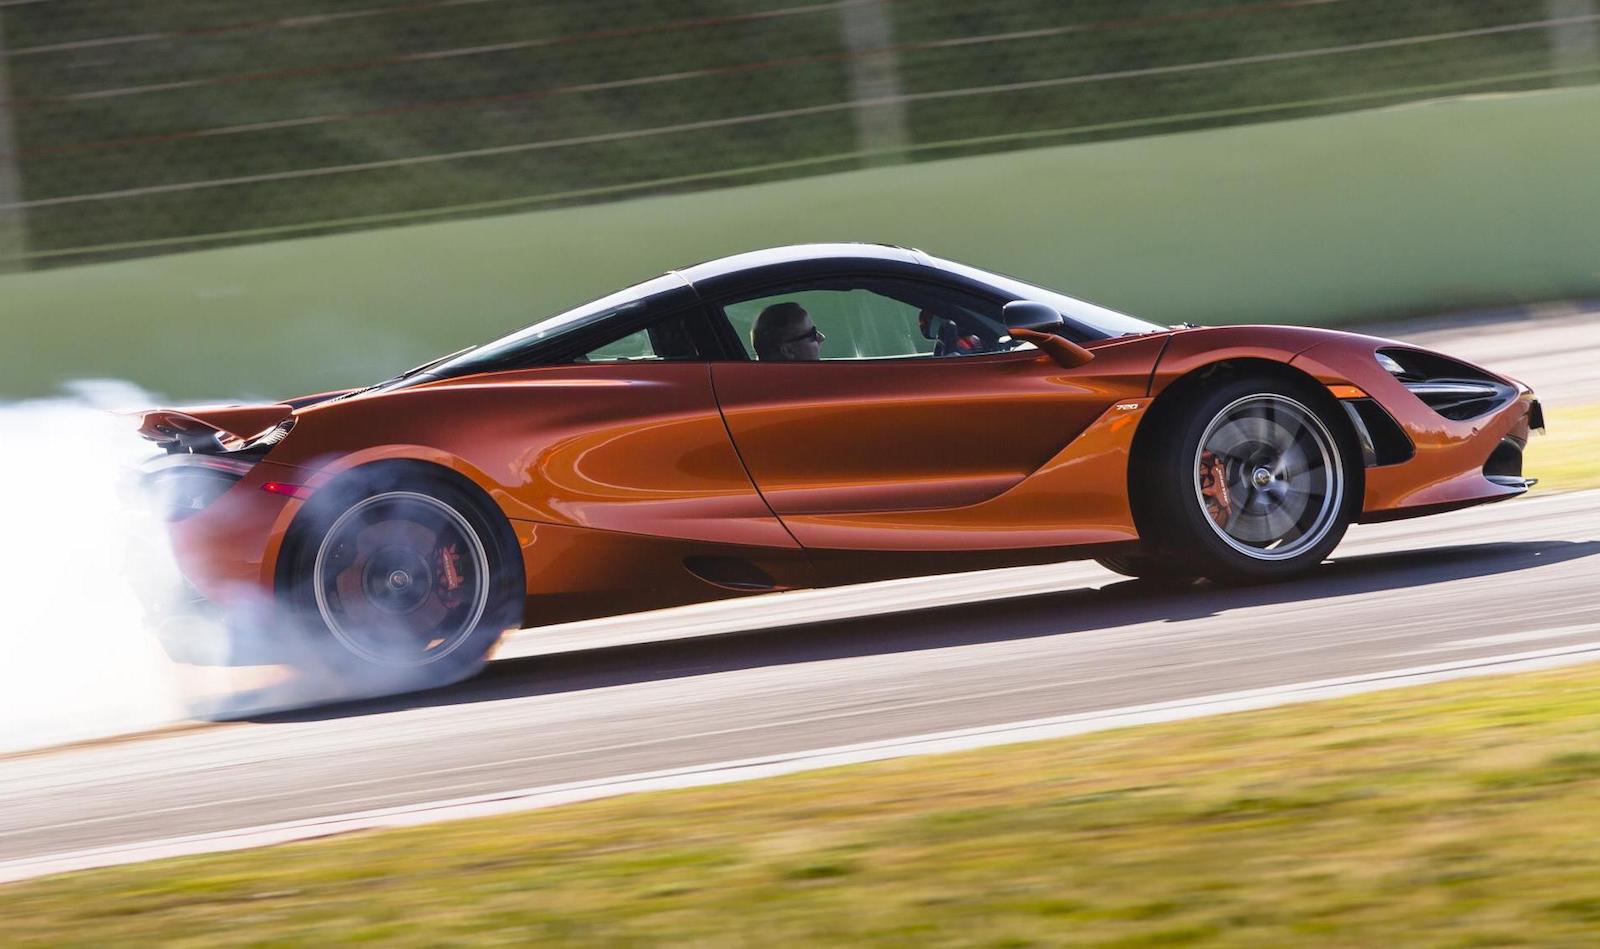 McLaren considering AWD for future supercars, electric front axle